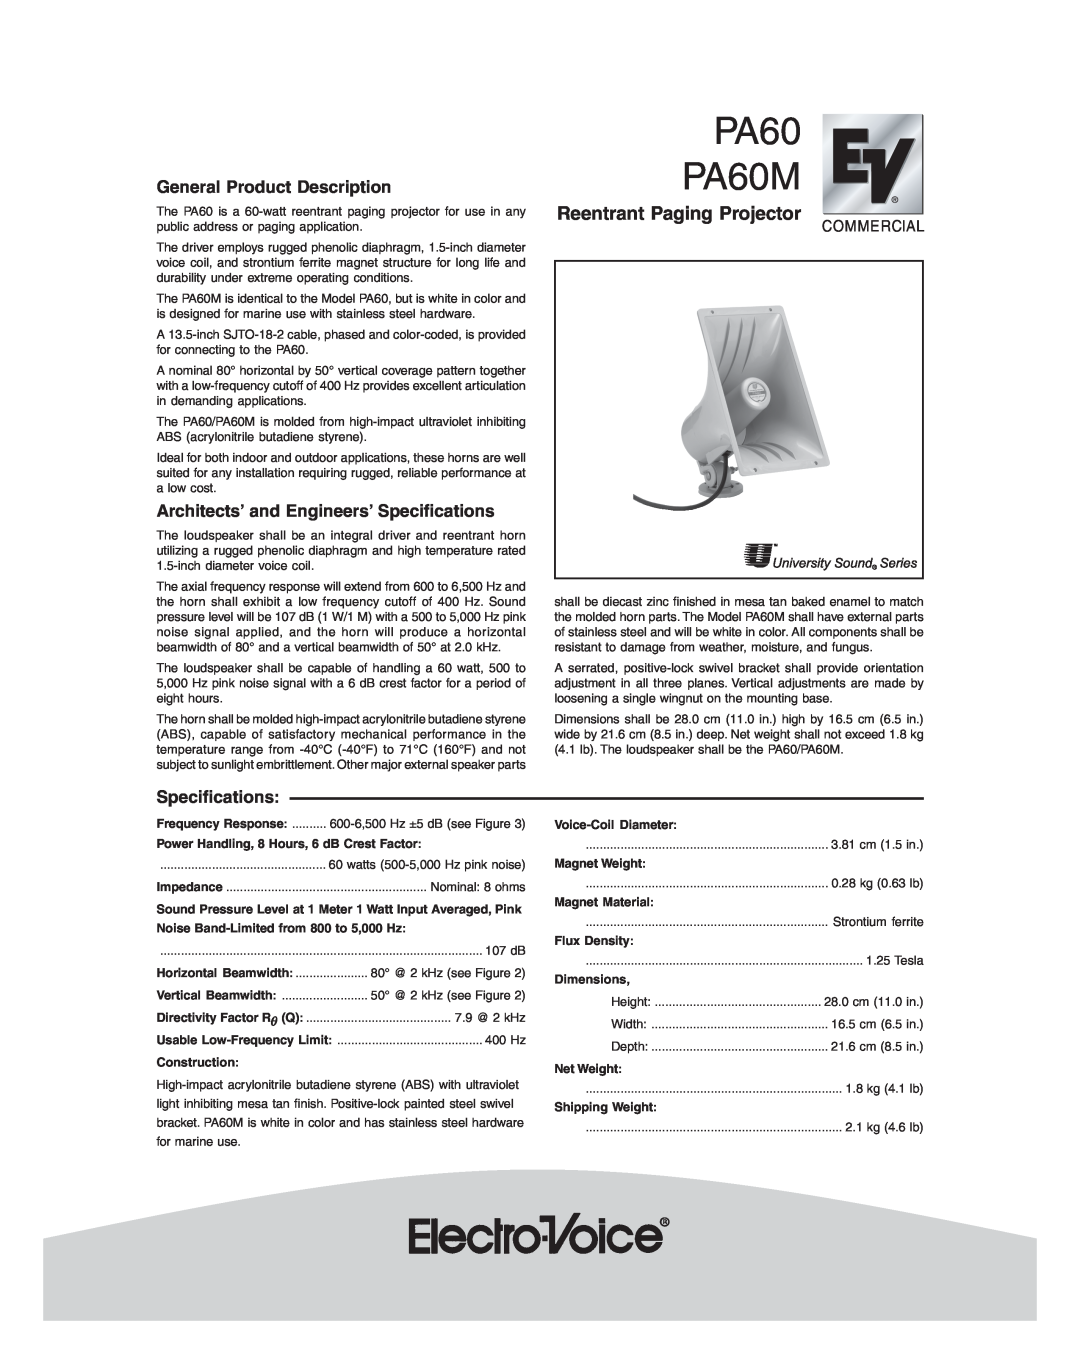 Electro-Voice specifications General Product Description, Architects’ and Engineers’ Specifications, PA60 PA60M 